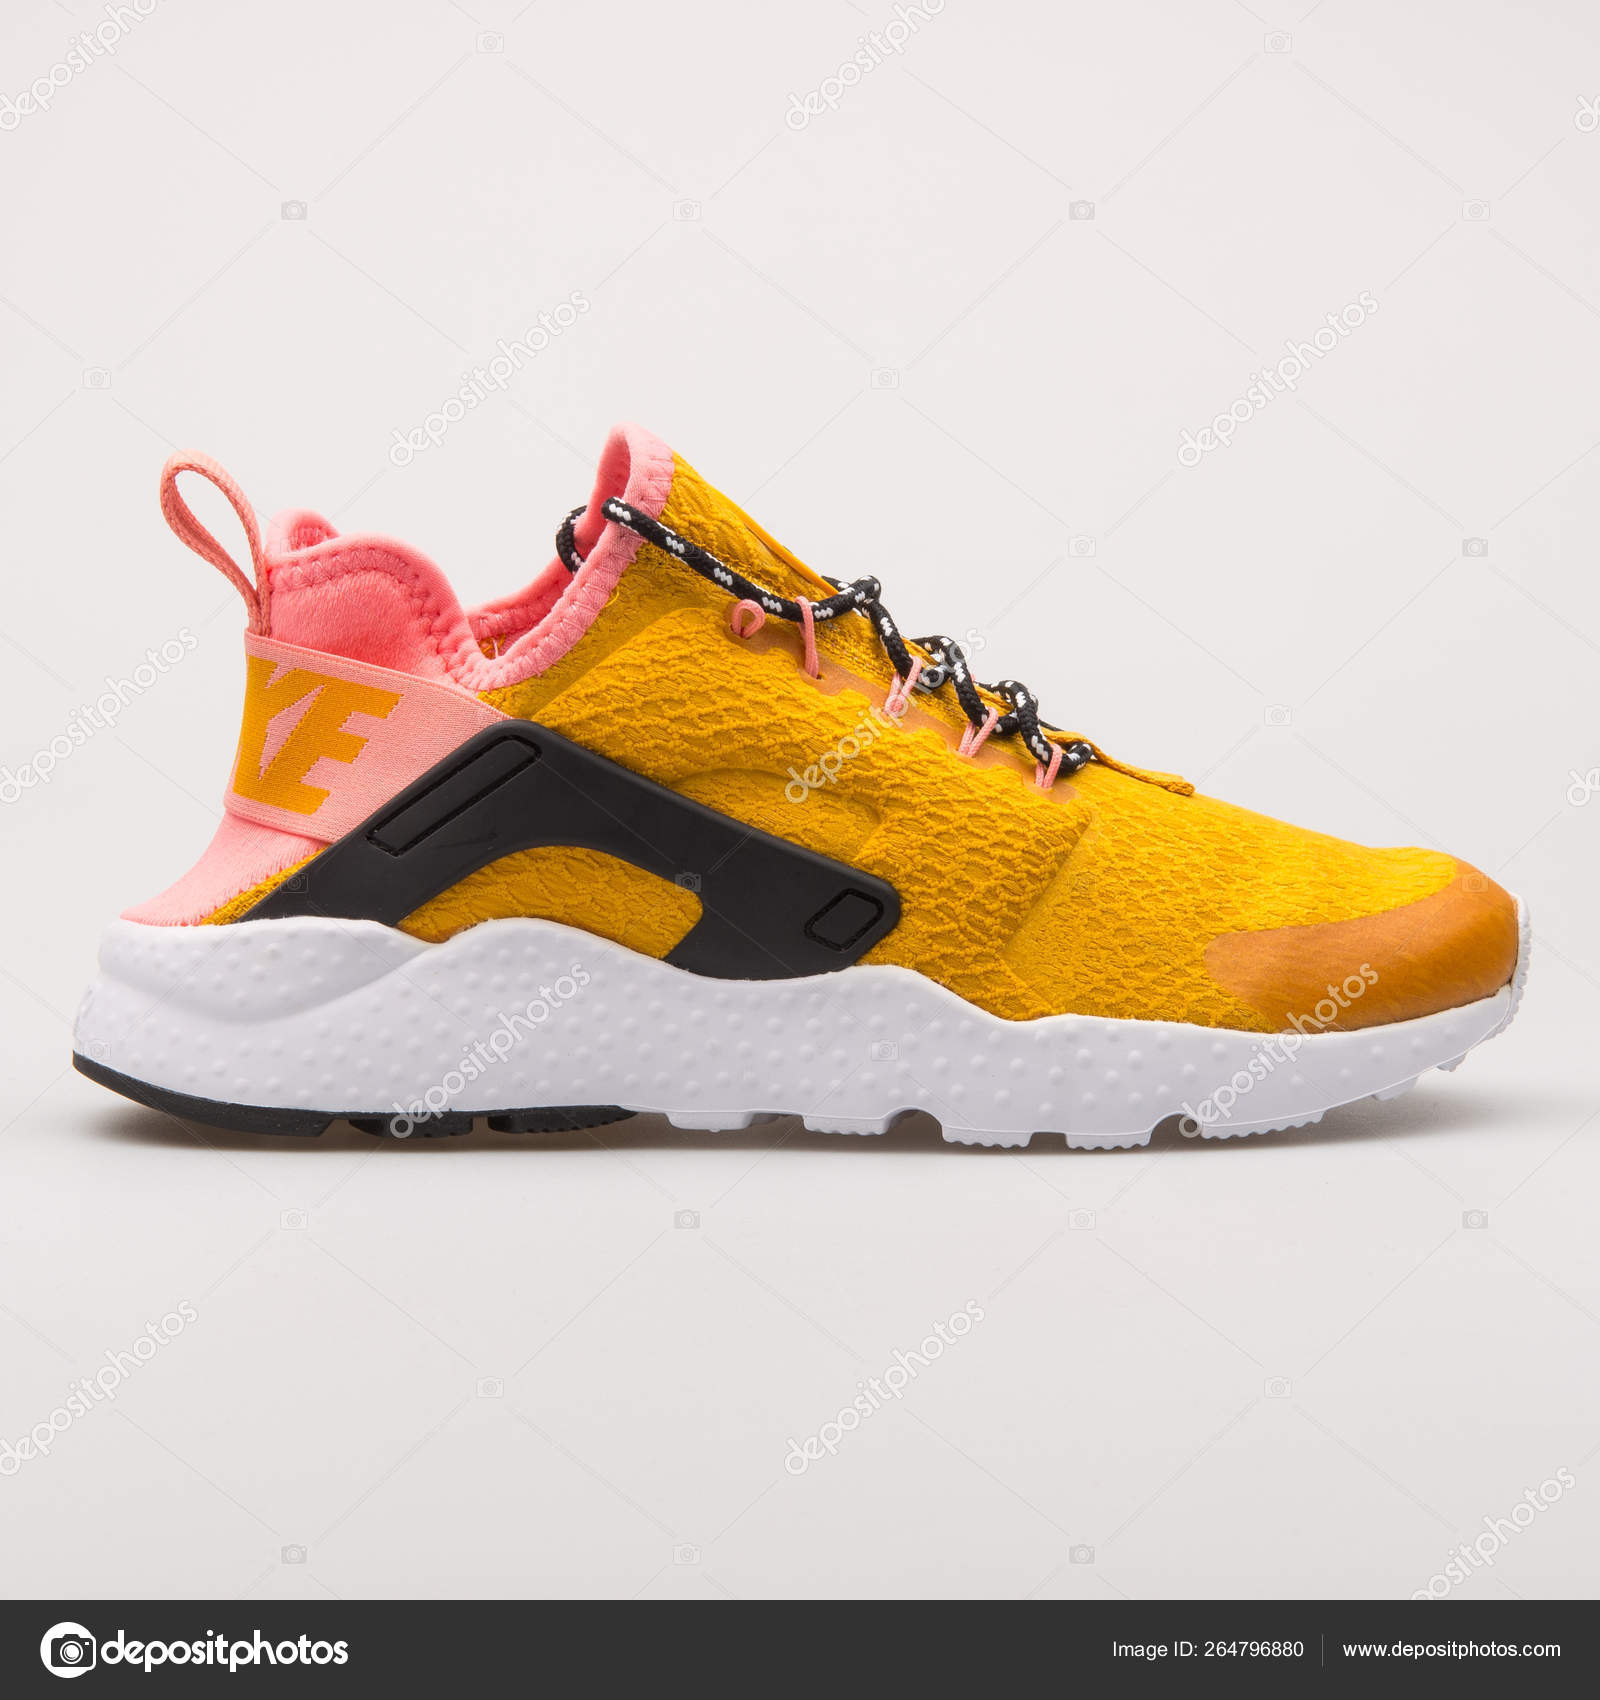 Nike Air Huarache SE gold and pink sneaker – Stock Editorial Photo © xMarshallfilms #264796880